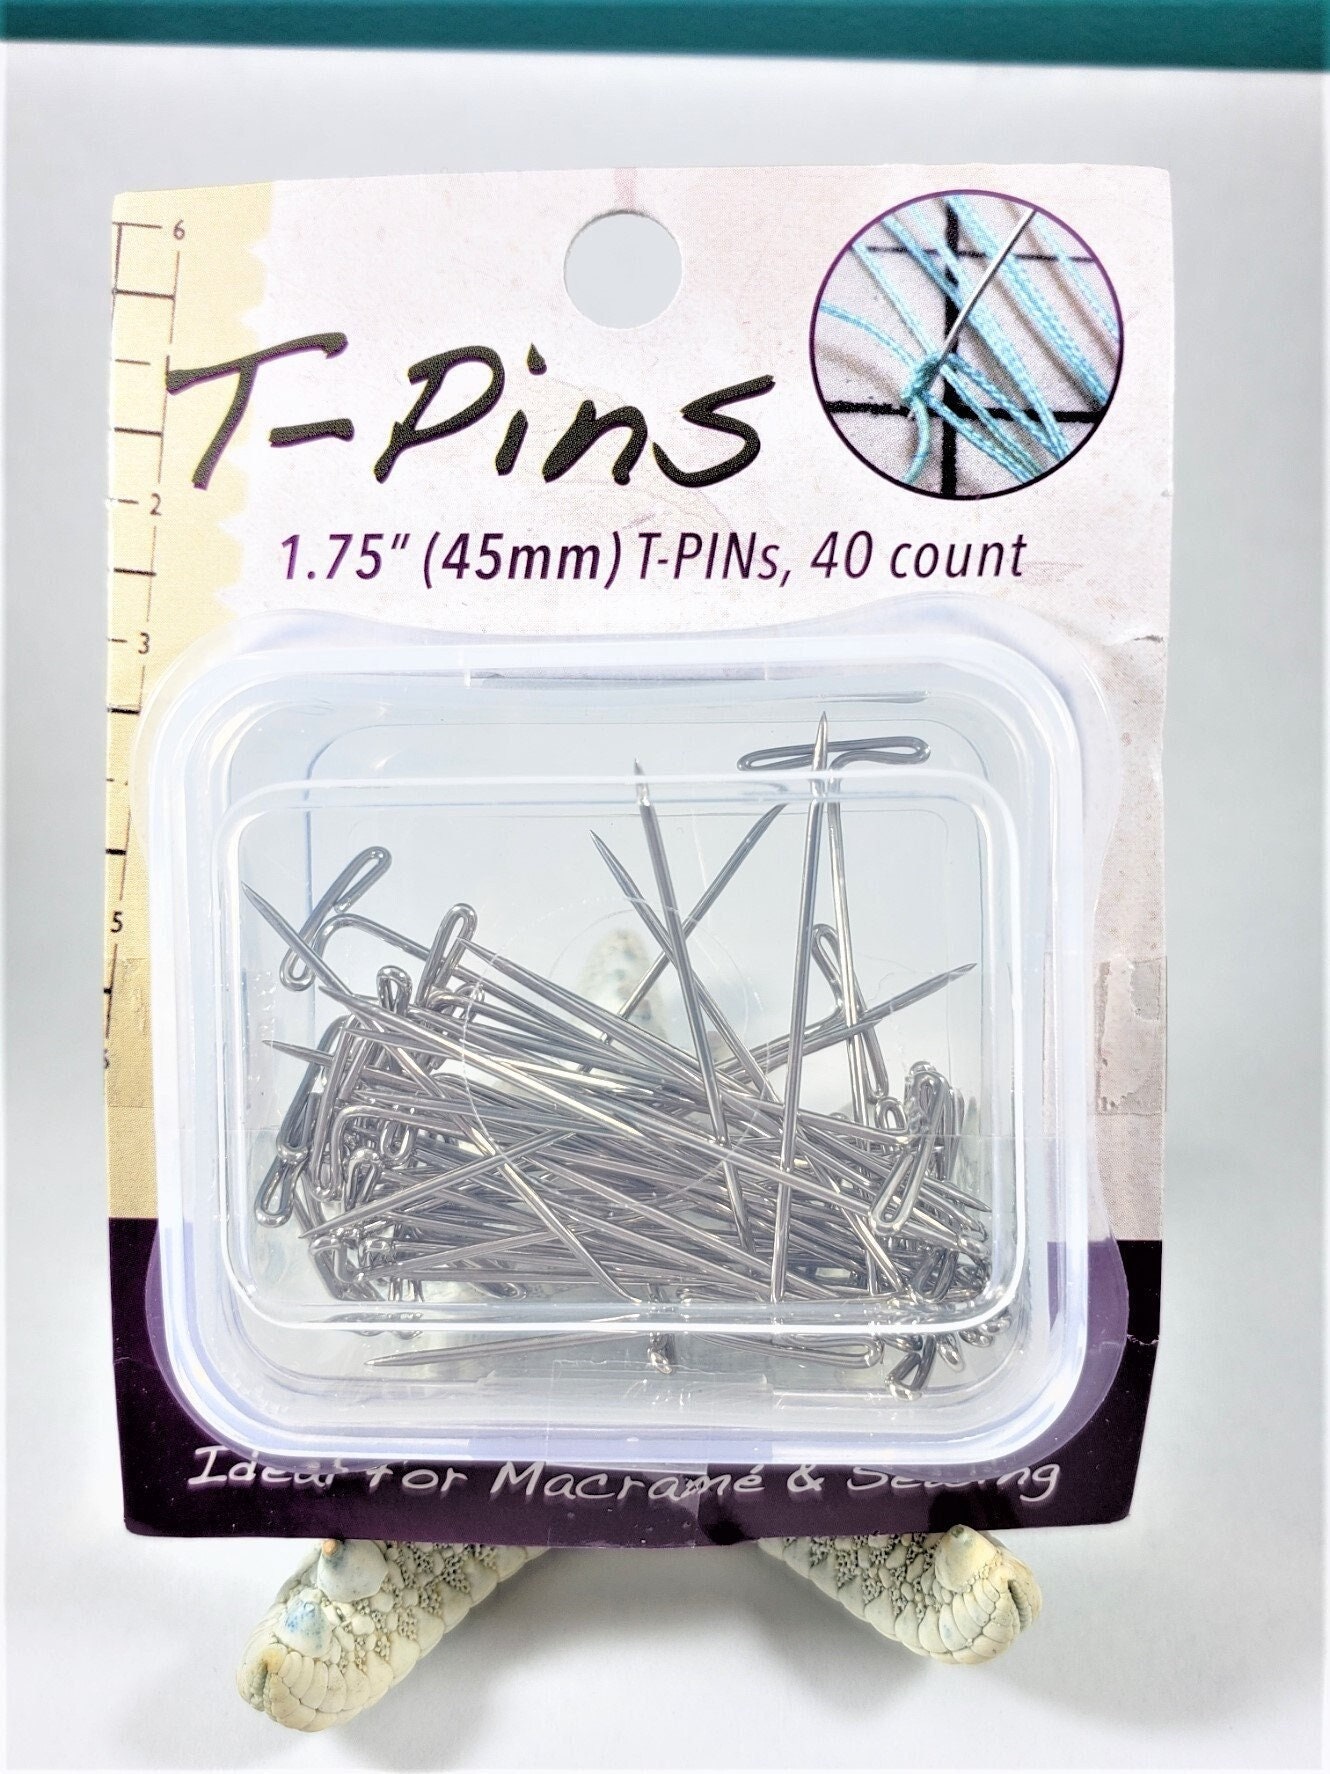 50pcs T Pins Stainless Steel T-Pins 1 Inch Straight T-Pins, Silver